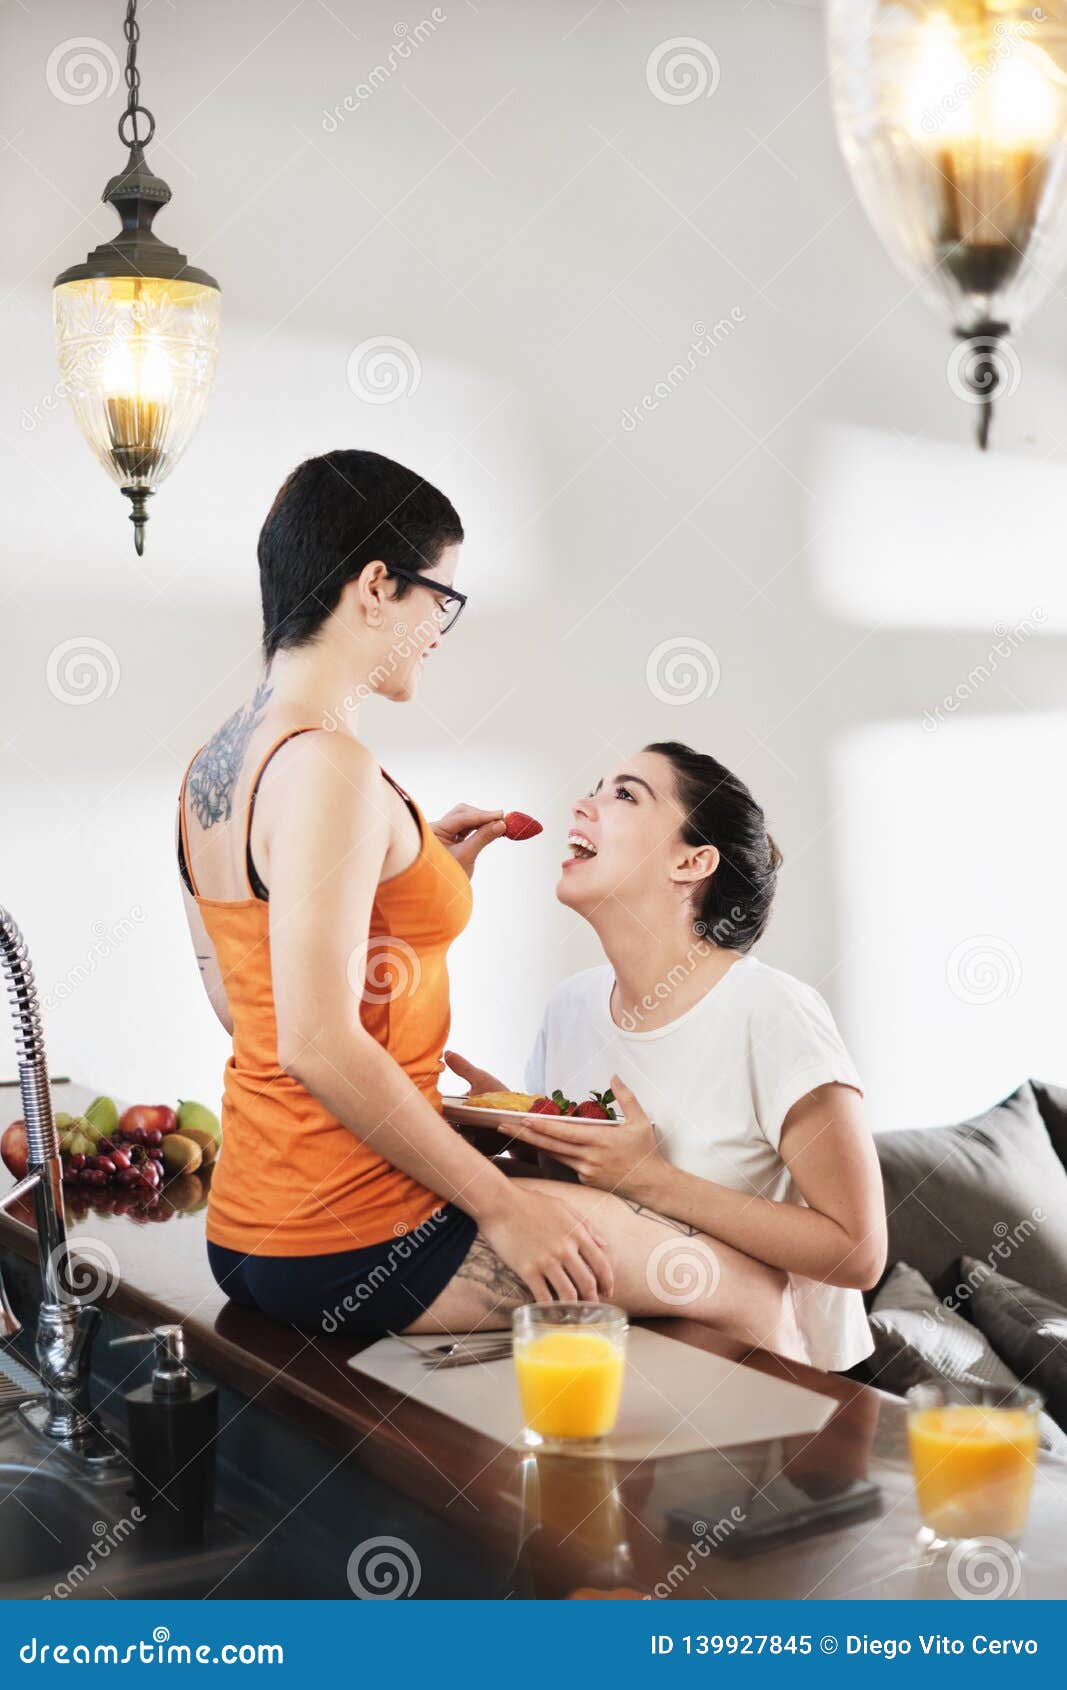 Lesbians Eating Each Other